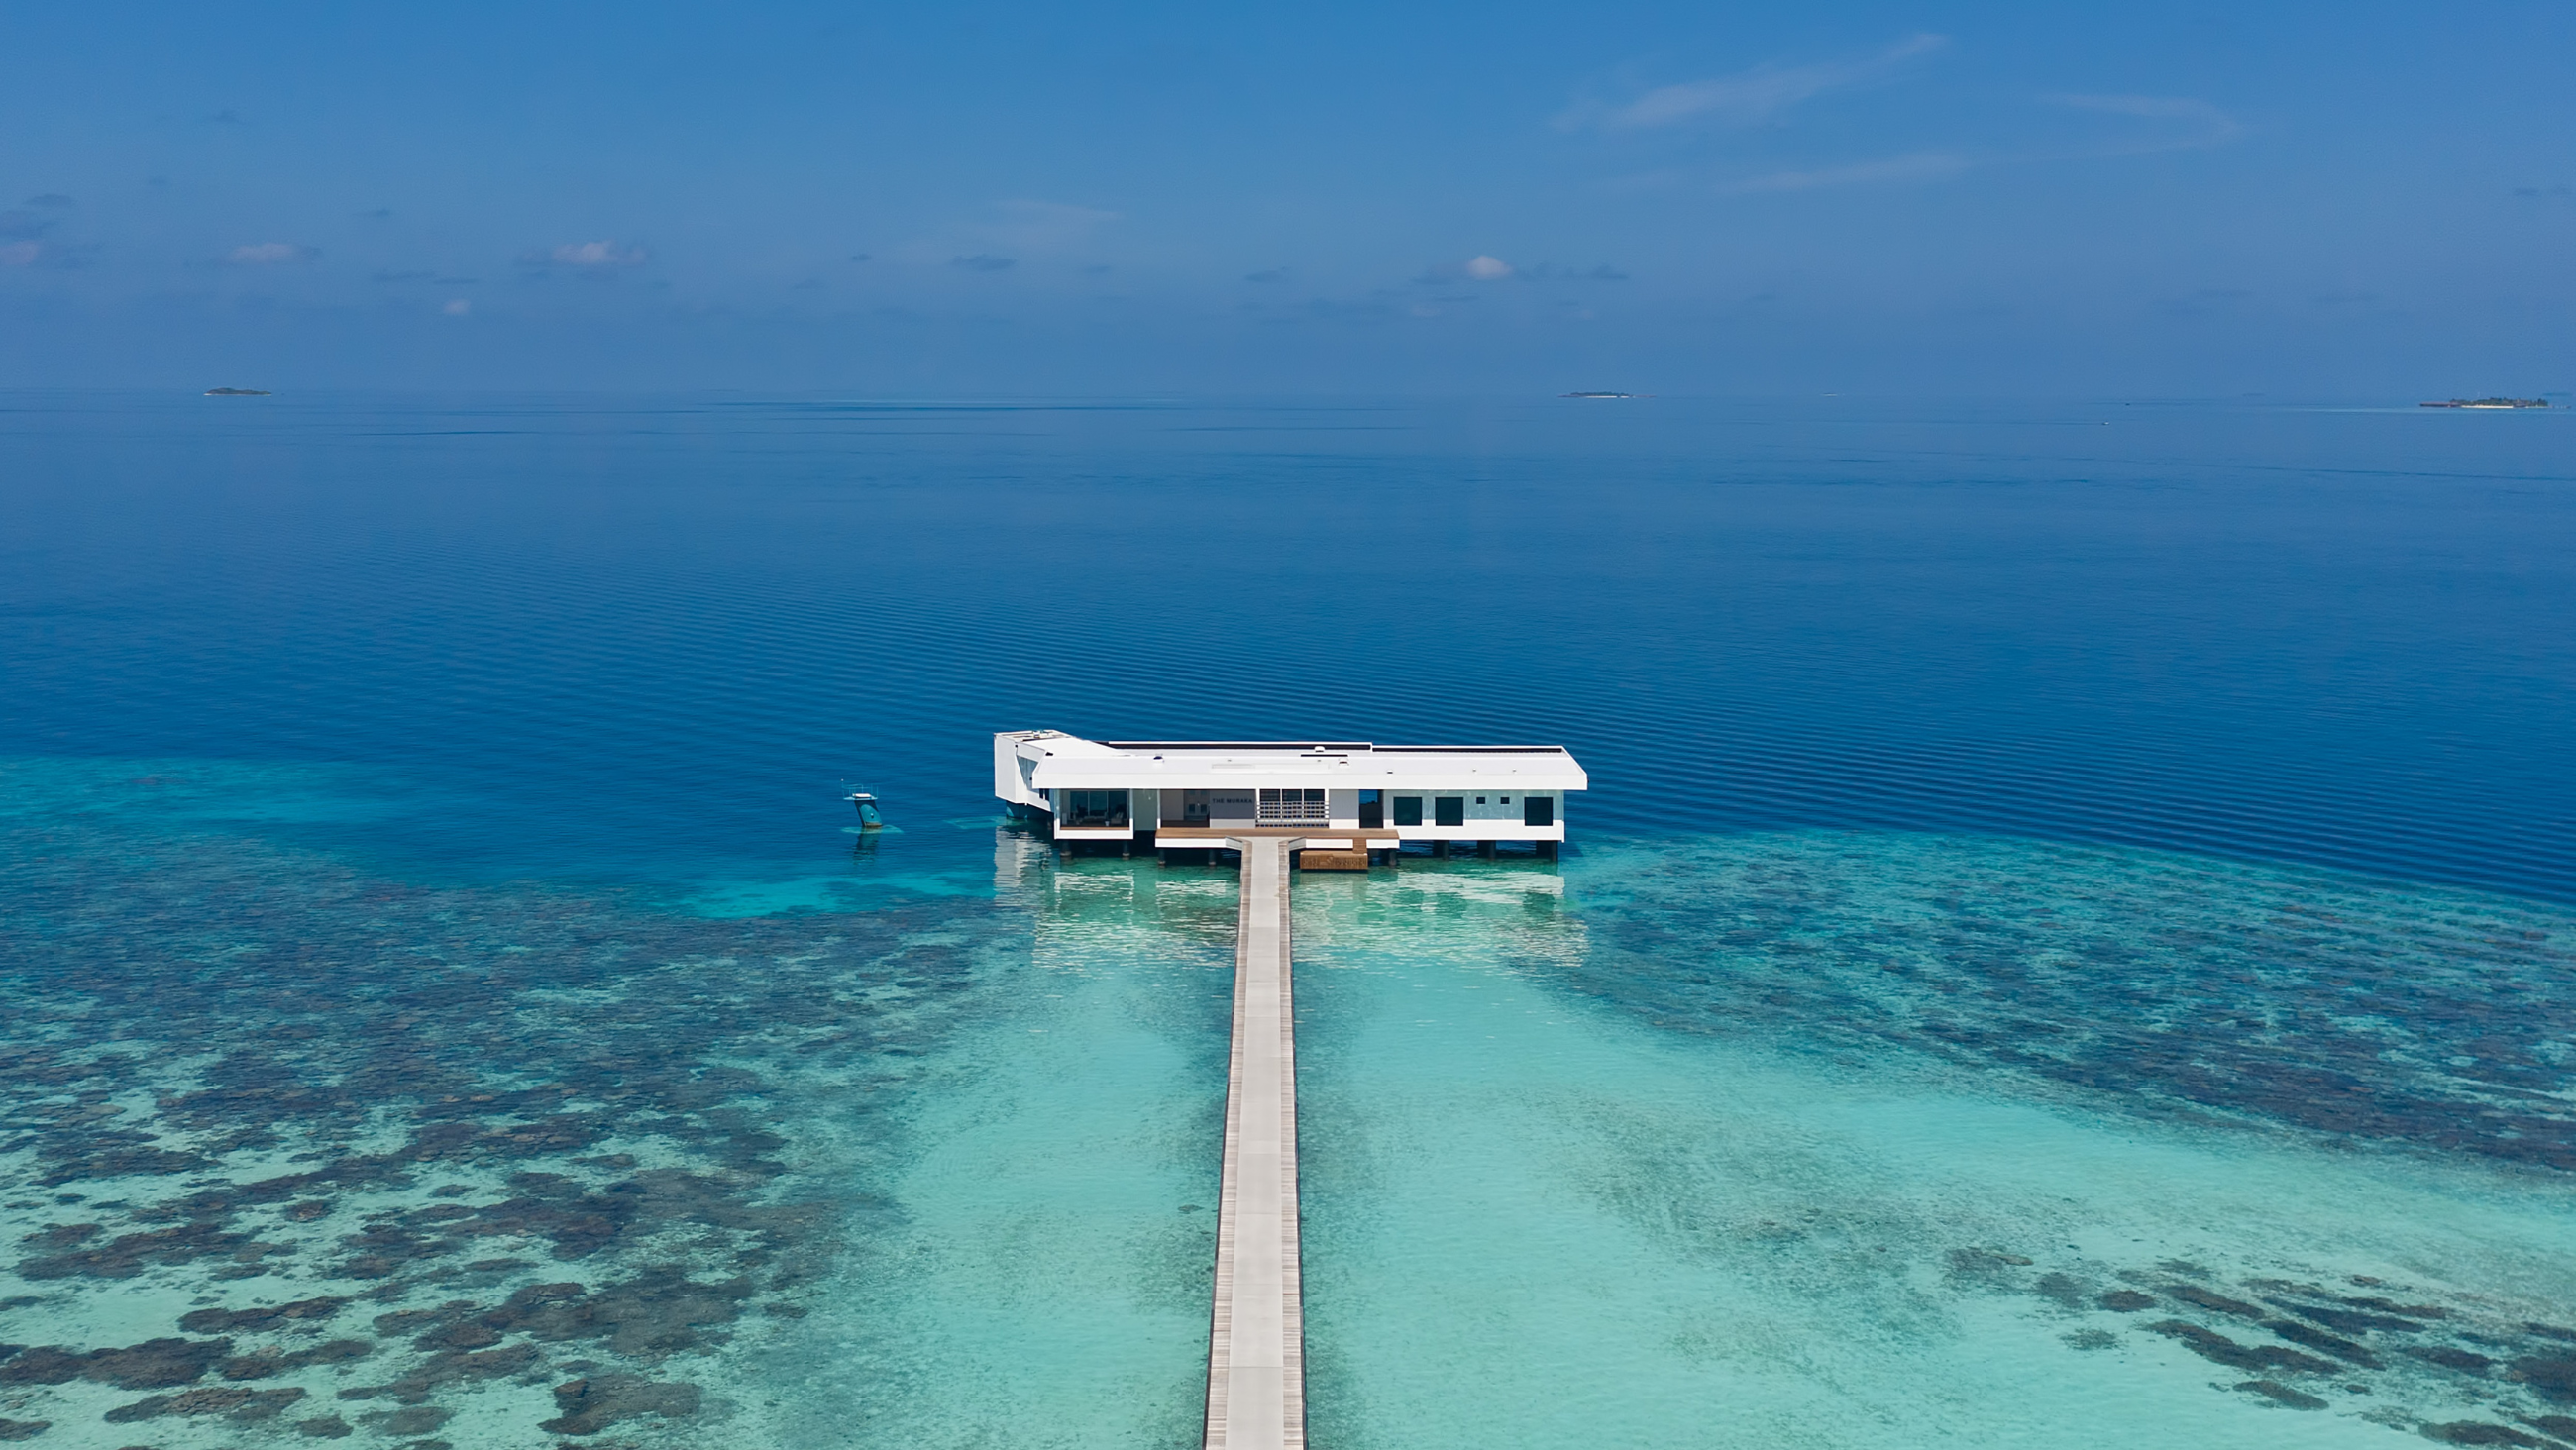 The Muraka: A Submerged Haven in the Maldives